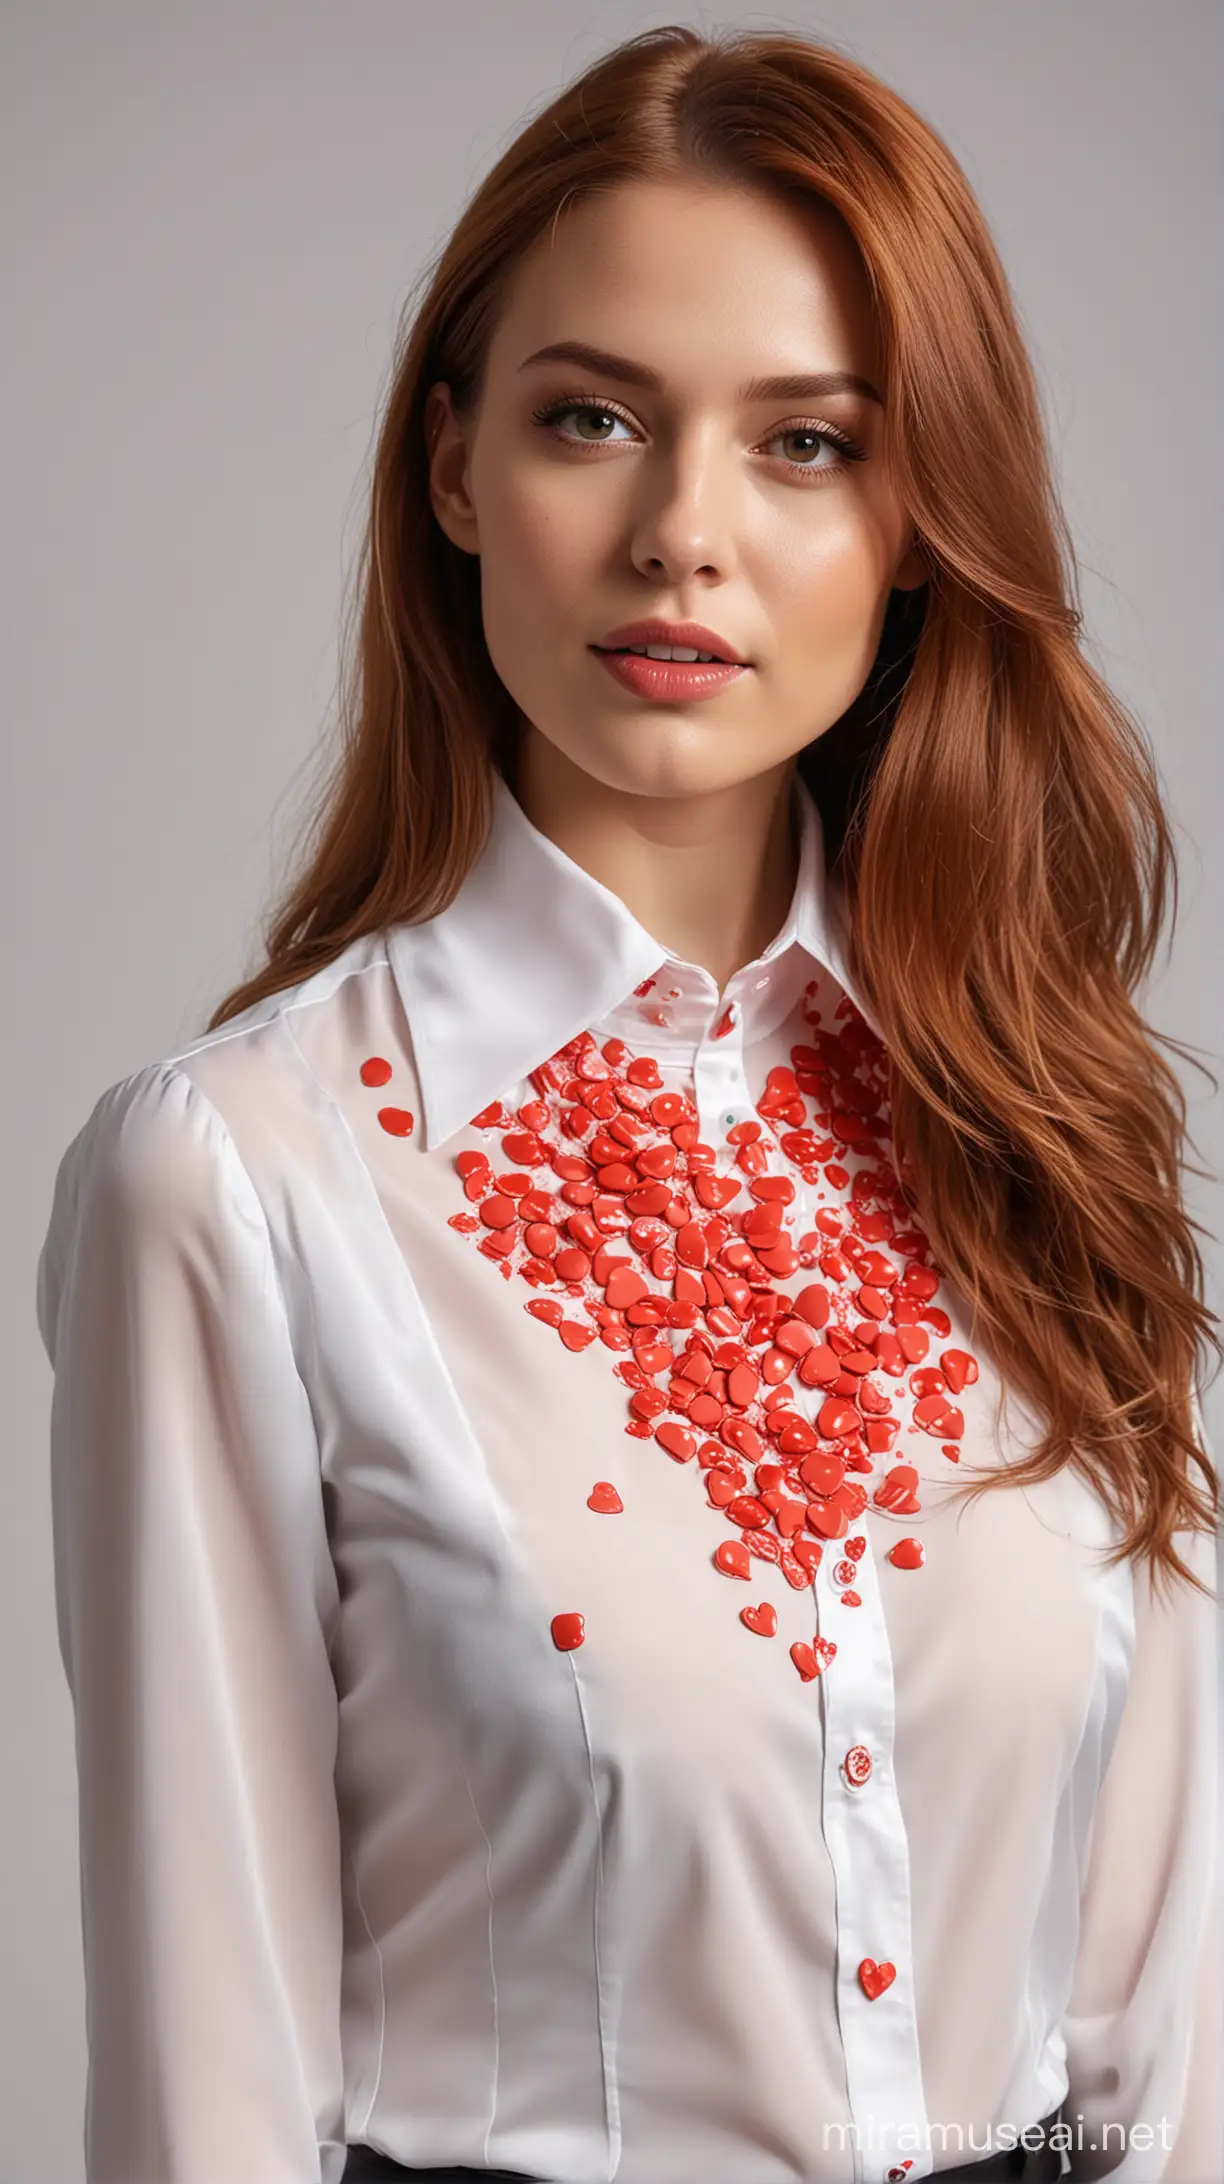 Realistyc color scene brested women as elegant secretary focus face ginger long hair

shinig satin white blouses on material whit a stiffened collar, great attention to additional elements such as seams, hold in hand  red-transparent shapes of hearts  material texture covered by slime goo well-lit composition, bright background, focus on face in sensual smile slime goo on her full body pose